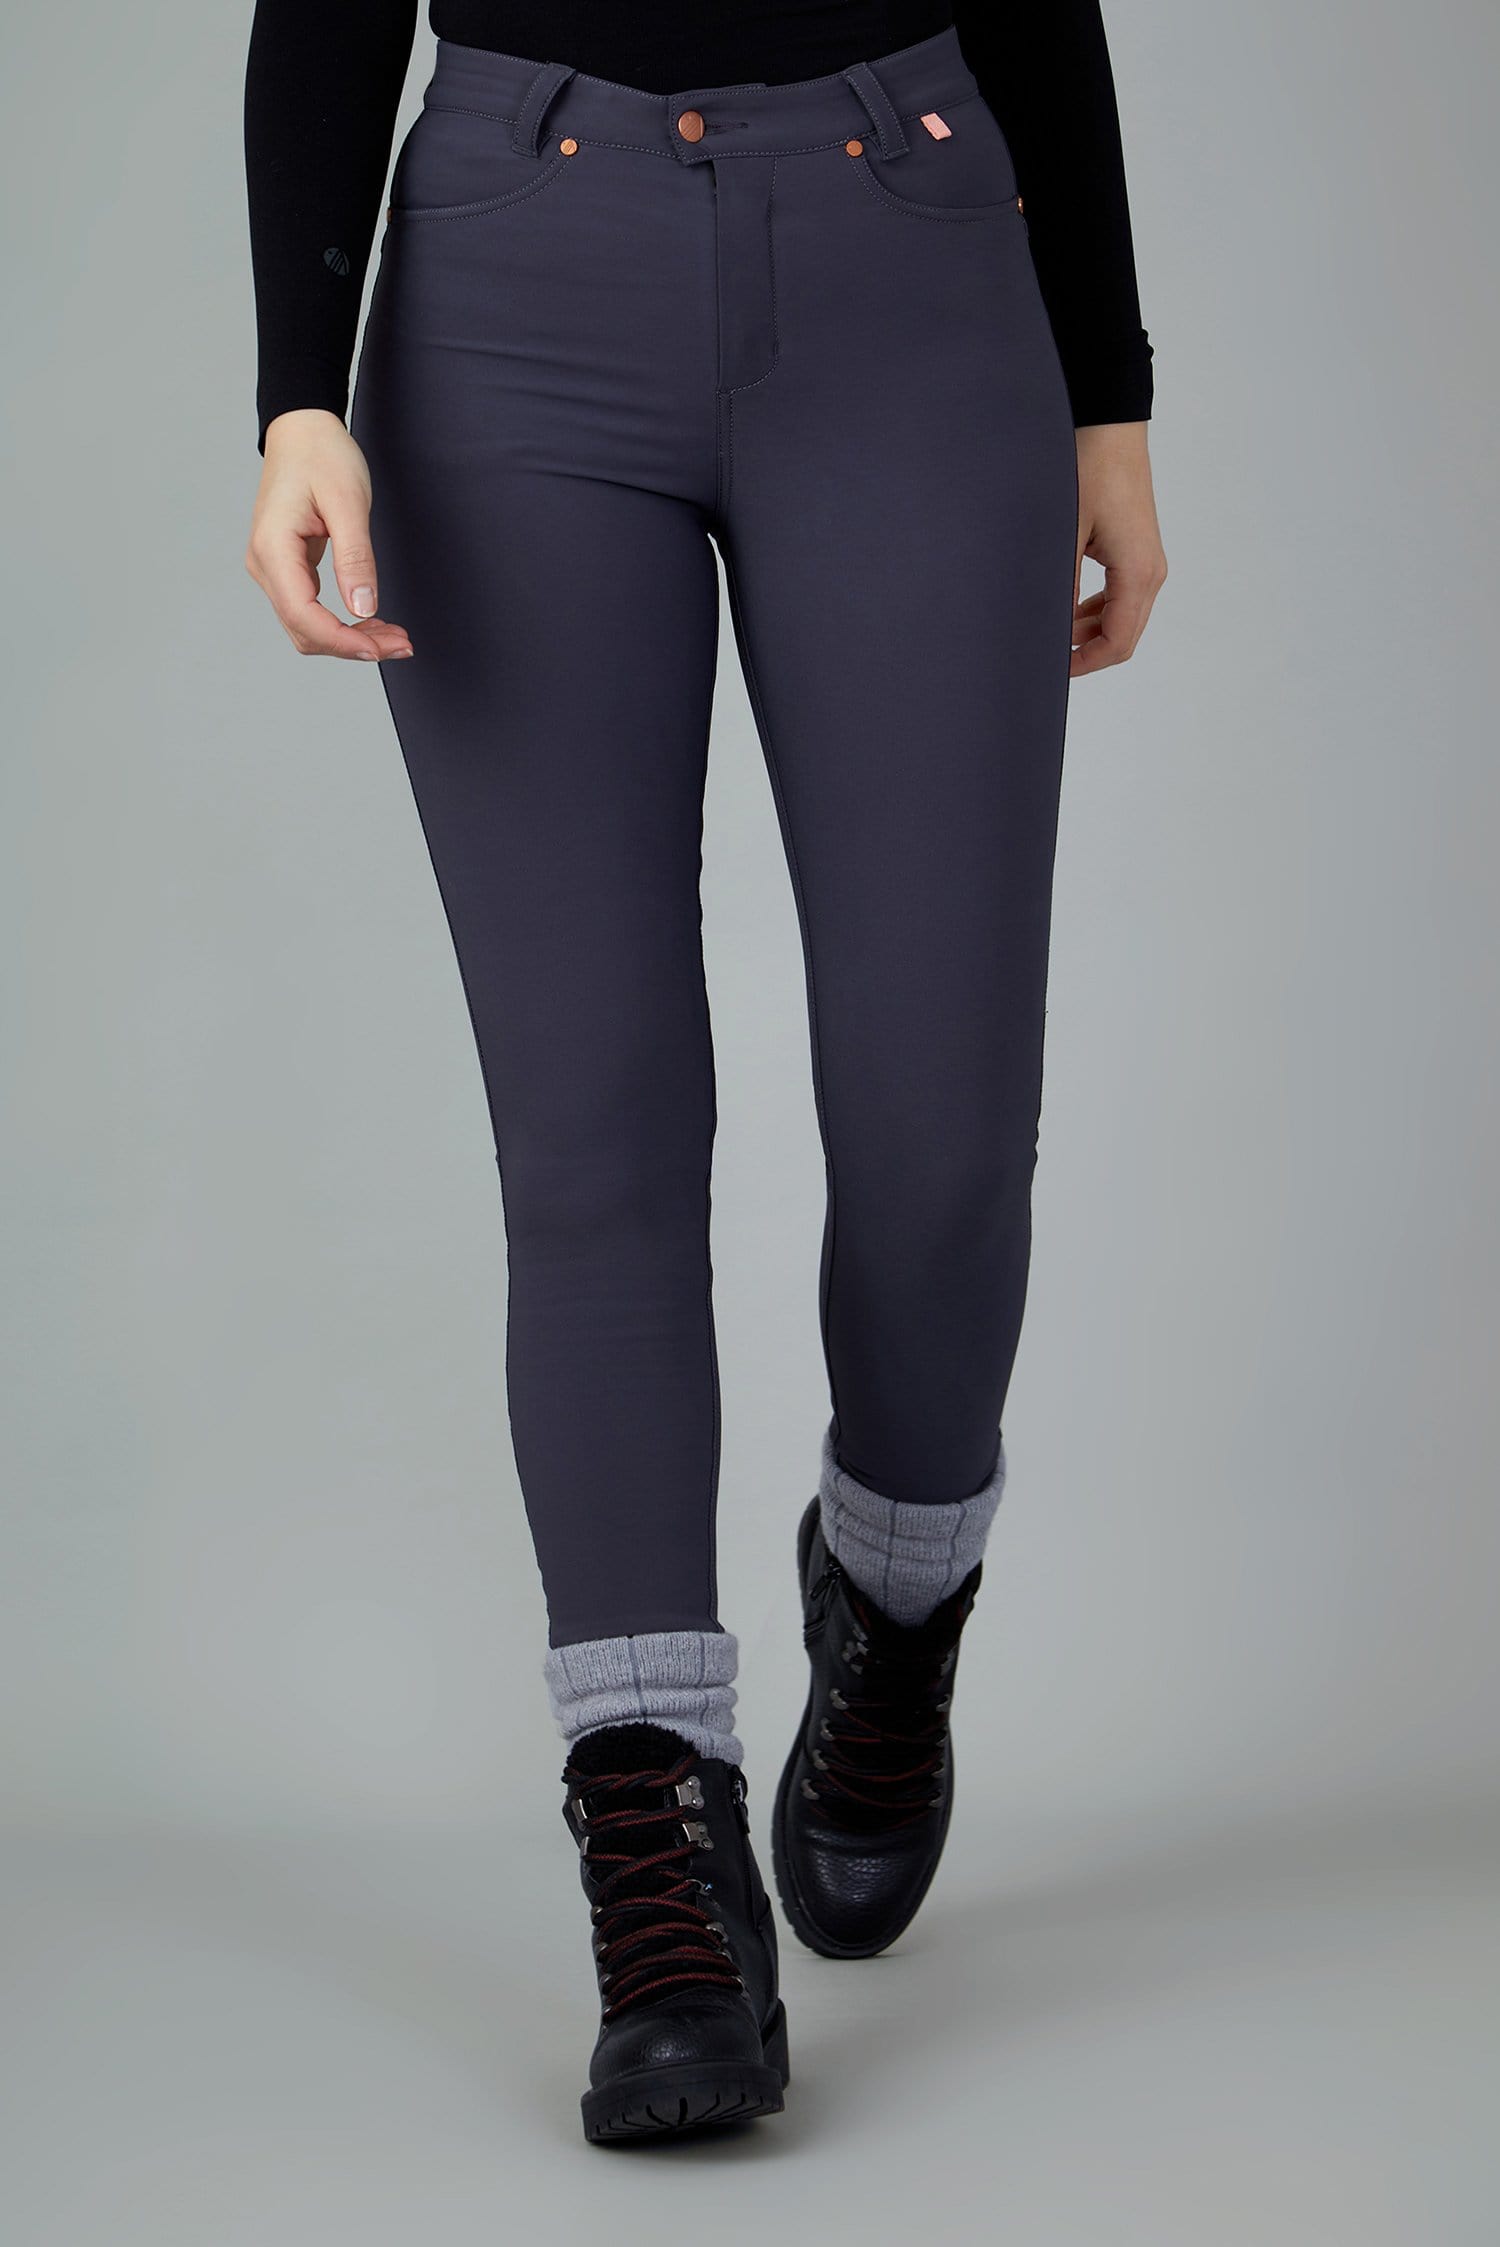 The Aventurite Stretch Skinny Outdoor Trousers - Obsidian - 32p / Uk14 - Womens - Acai Outdoorwear